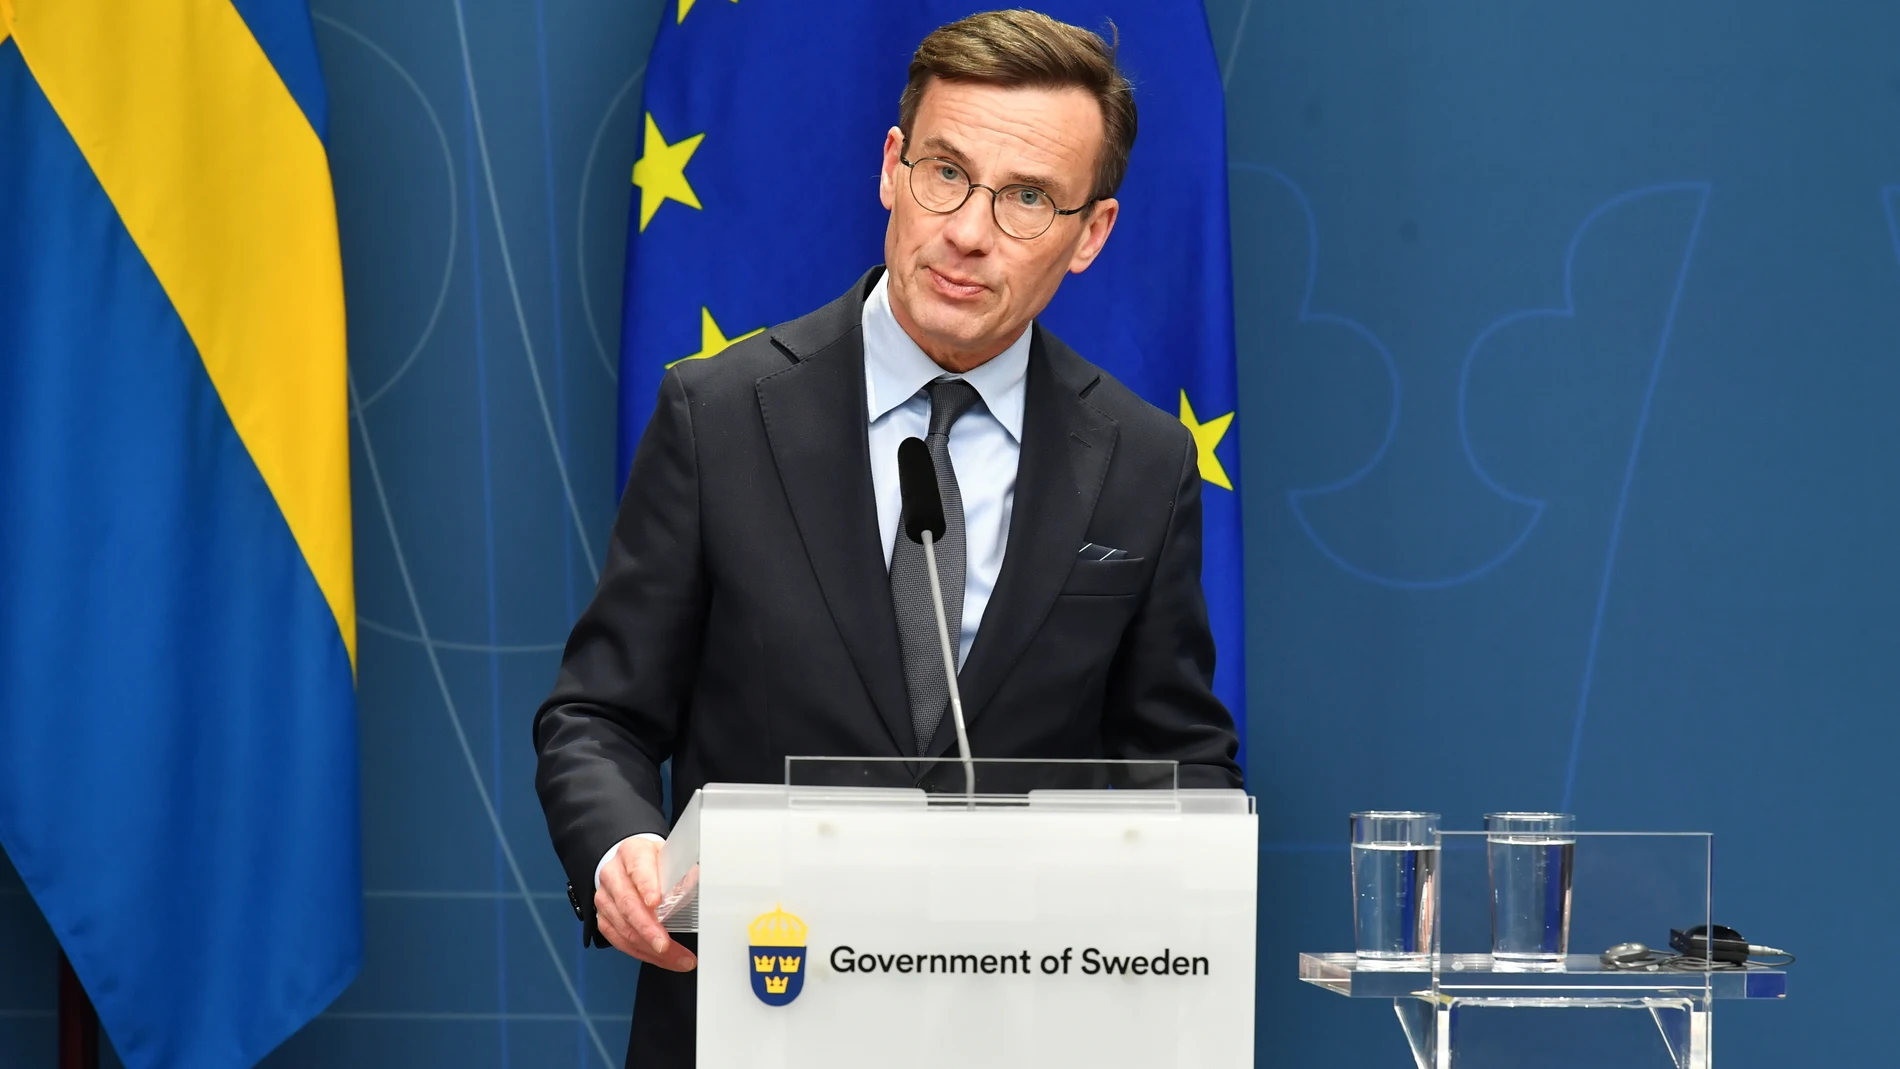 Stockholm (Sweden), 13/02/2023.- Swedish Prime Minister Ulf Kristersson during a press conference with Polish Prime Minister Mateusz Morawiecki after their meeting in Stockholm, Sweden, 13 February 2023. The meeting was focused on security policy and European support for Ukraine. (Polonia, Suecia, Ucrania, Estocolmo) EFE/EPA/ANDRZEJ LANGE POLAND OUT 